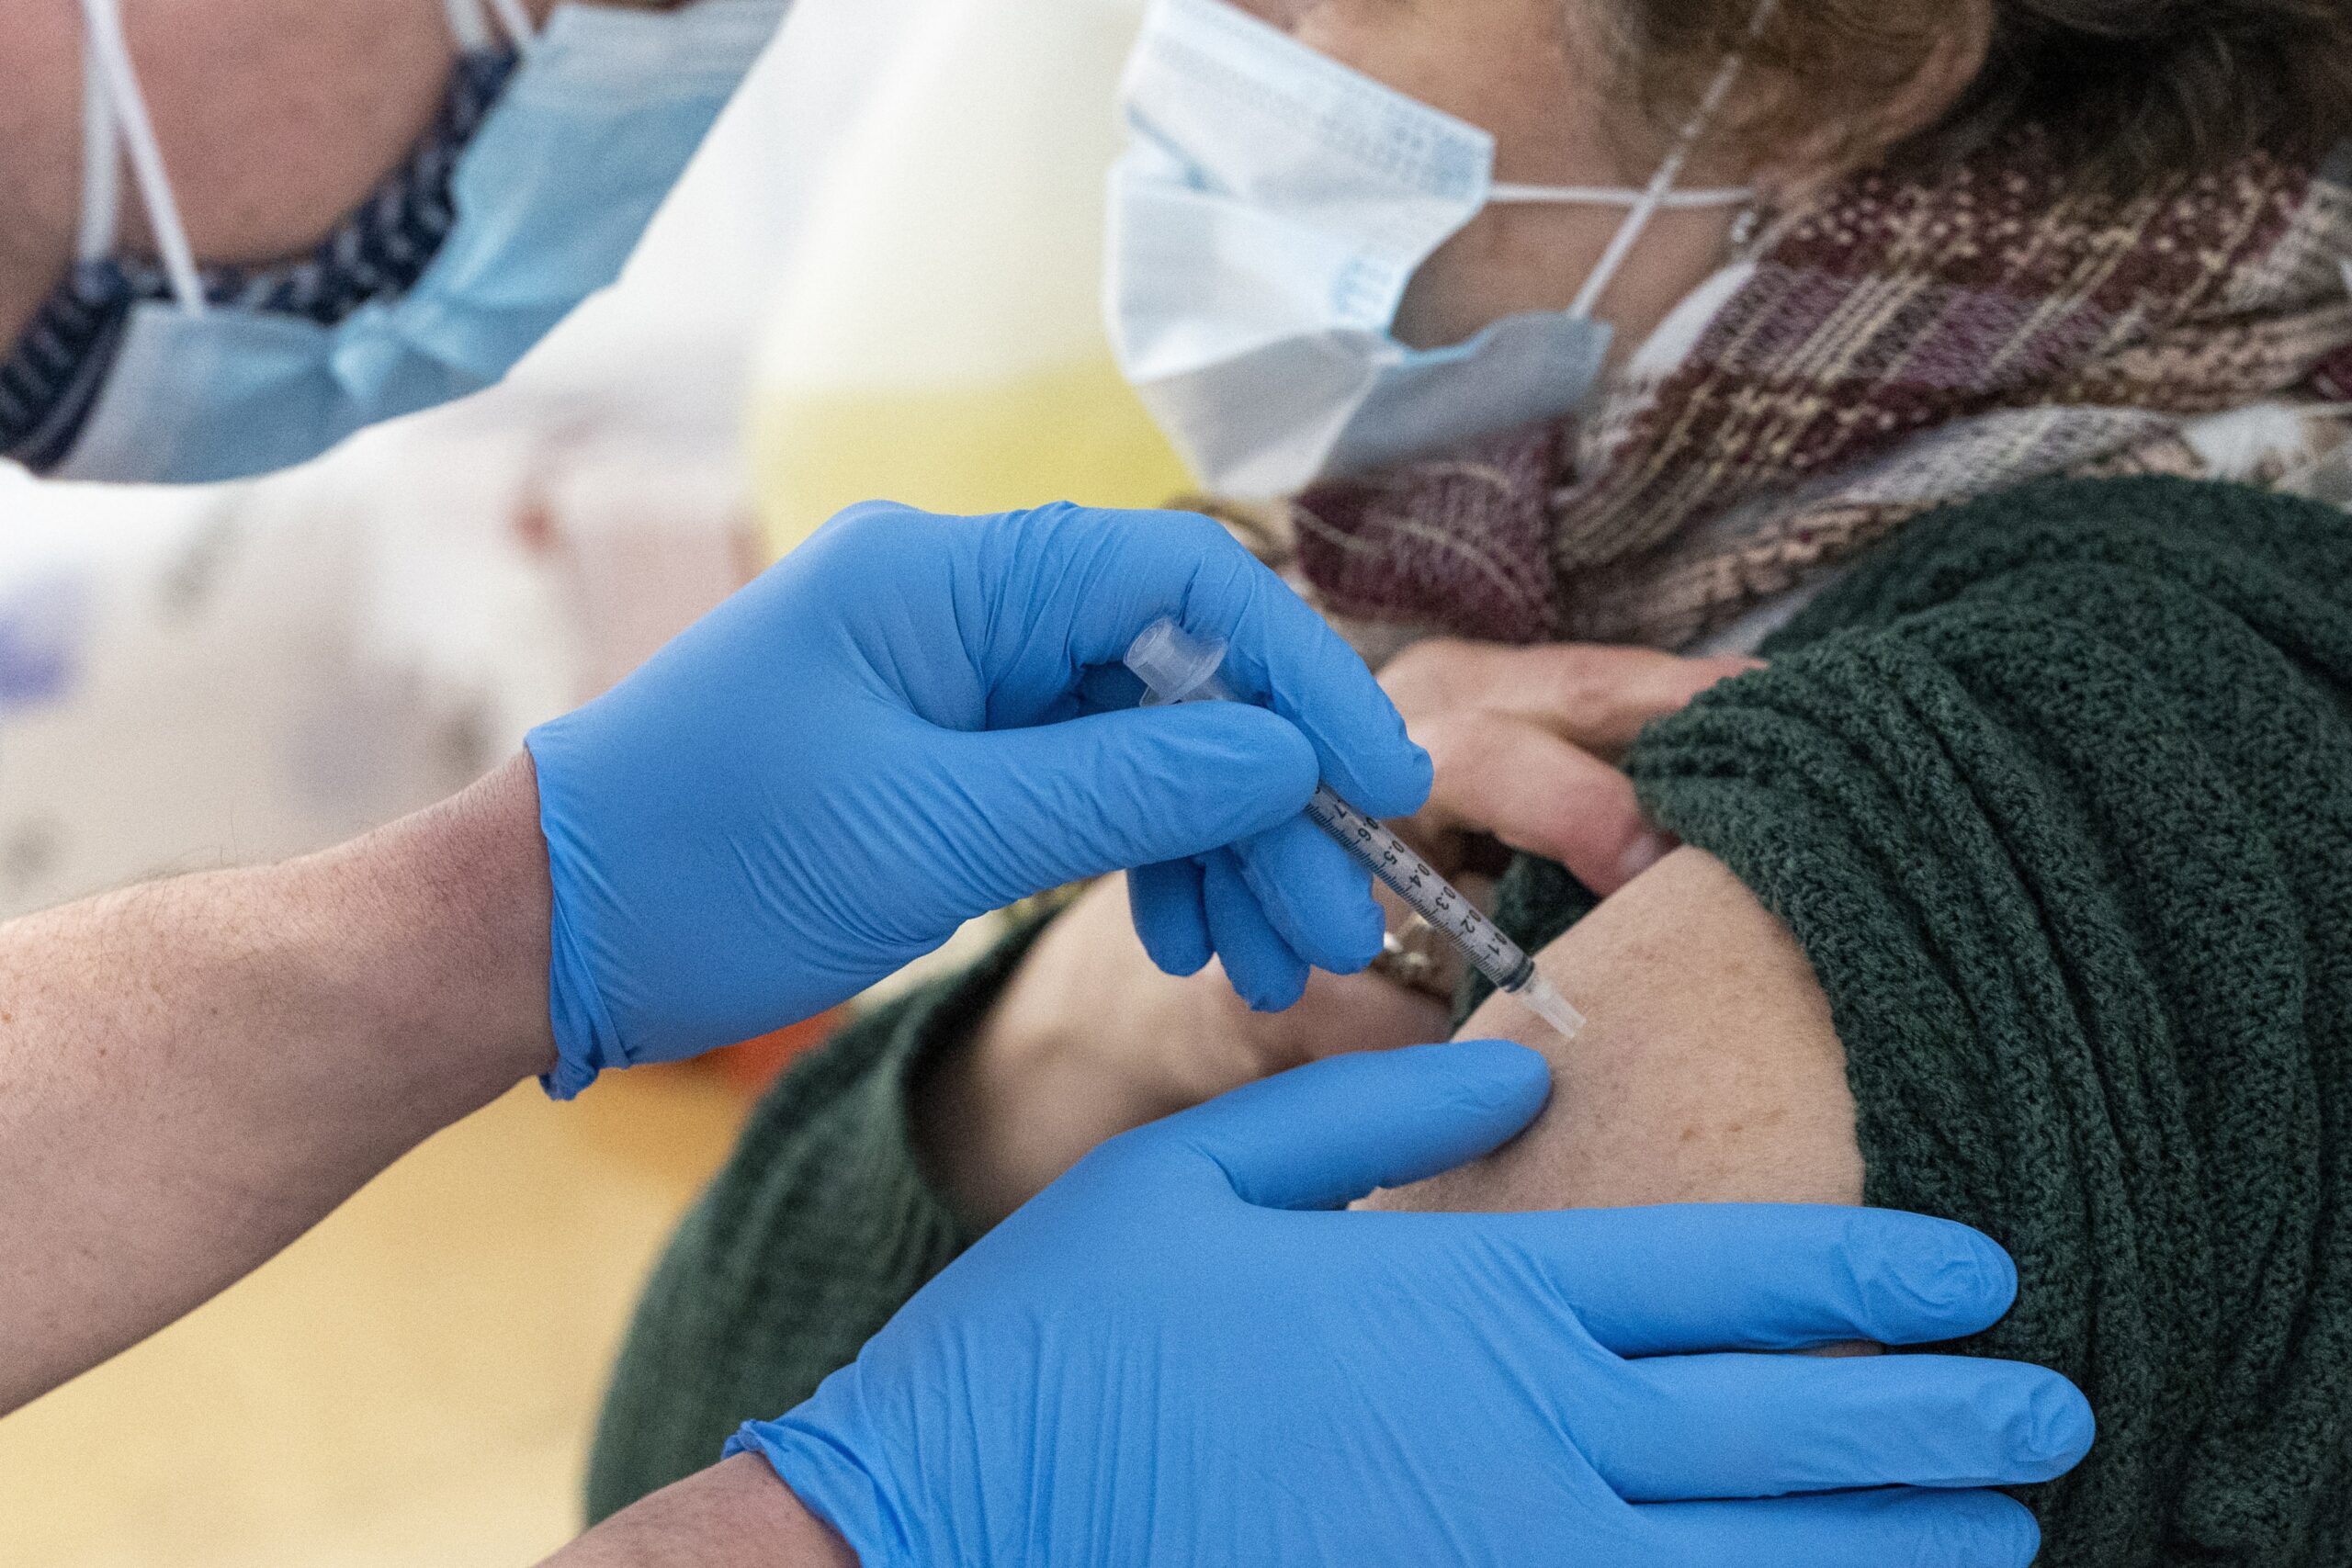 No, Your HIPAA Rights Aren’t Violated If Someone Asks Your Vaccine Status